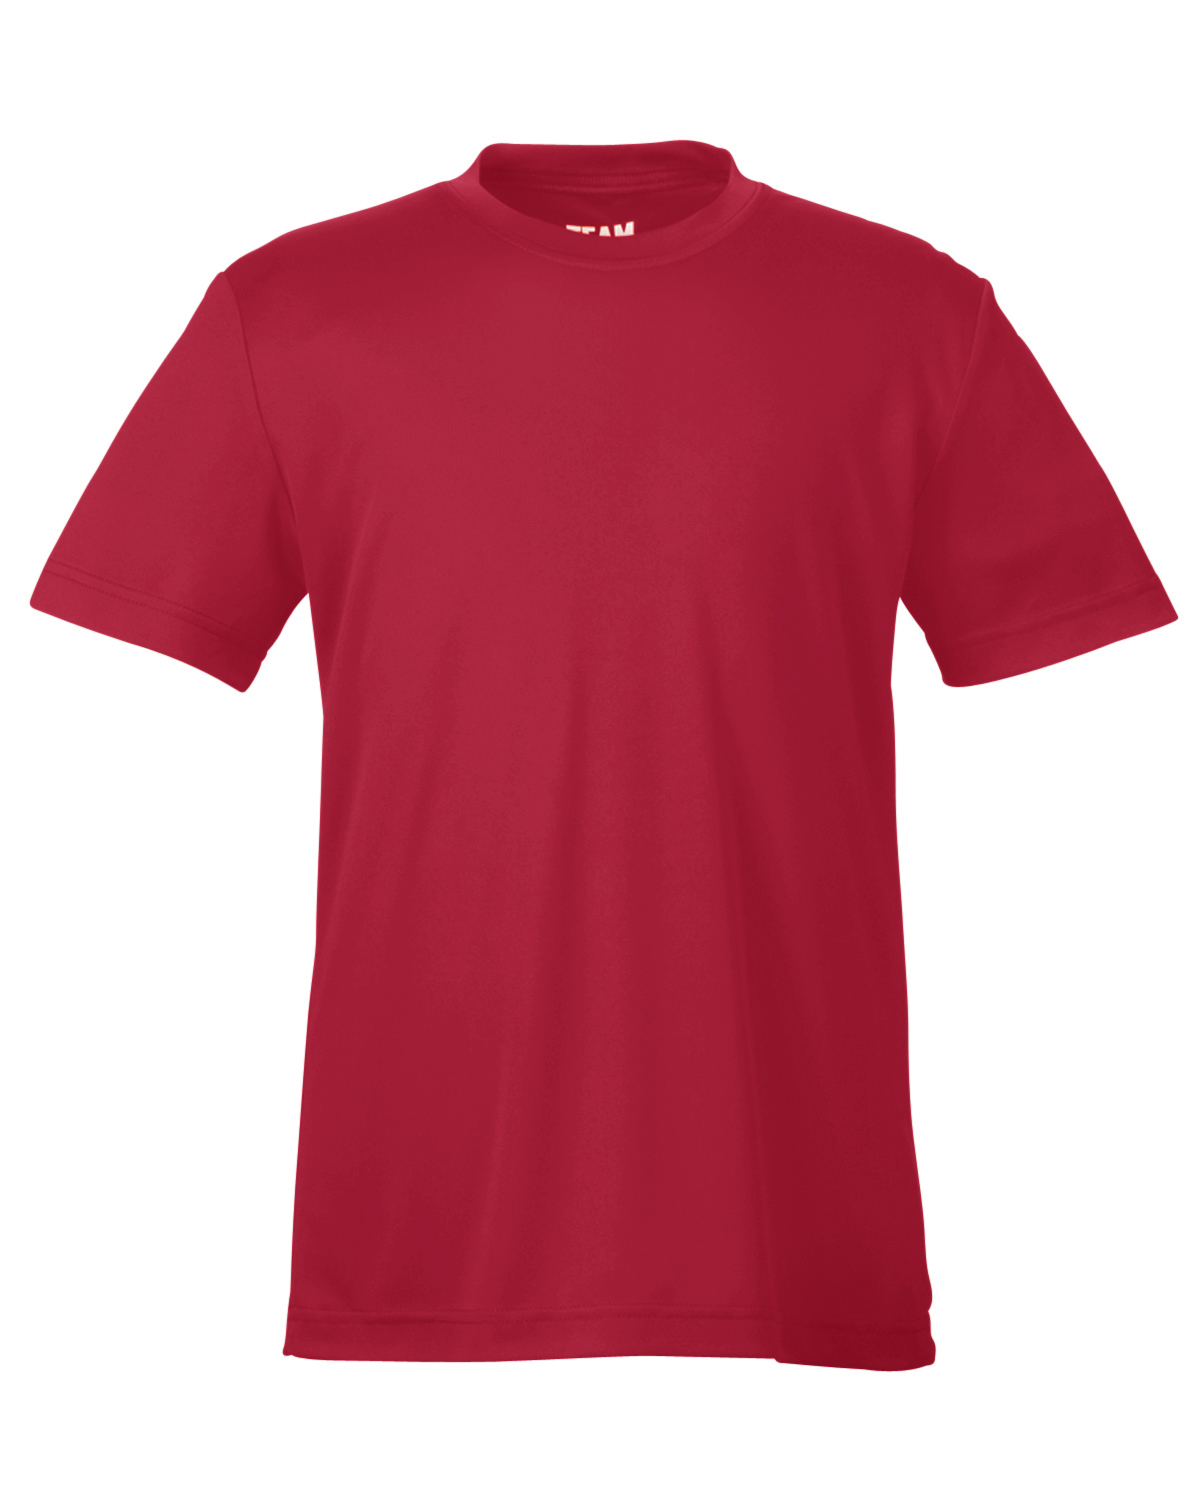 click to view SPORT SCRLET RED